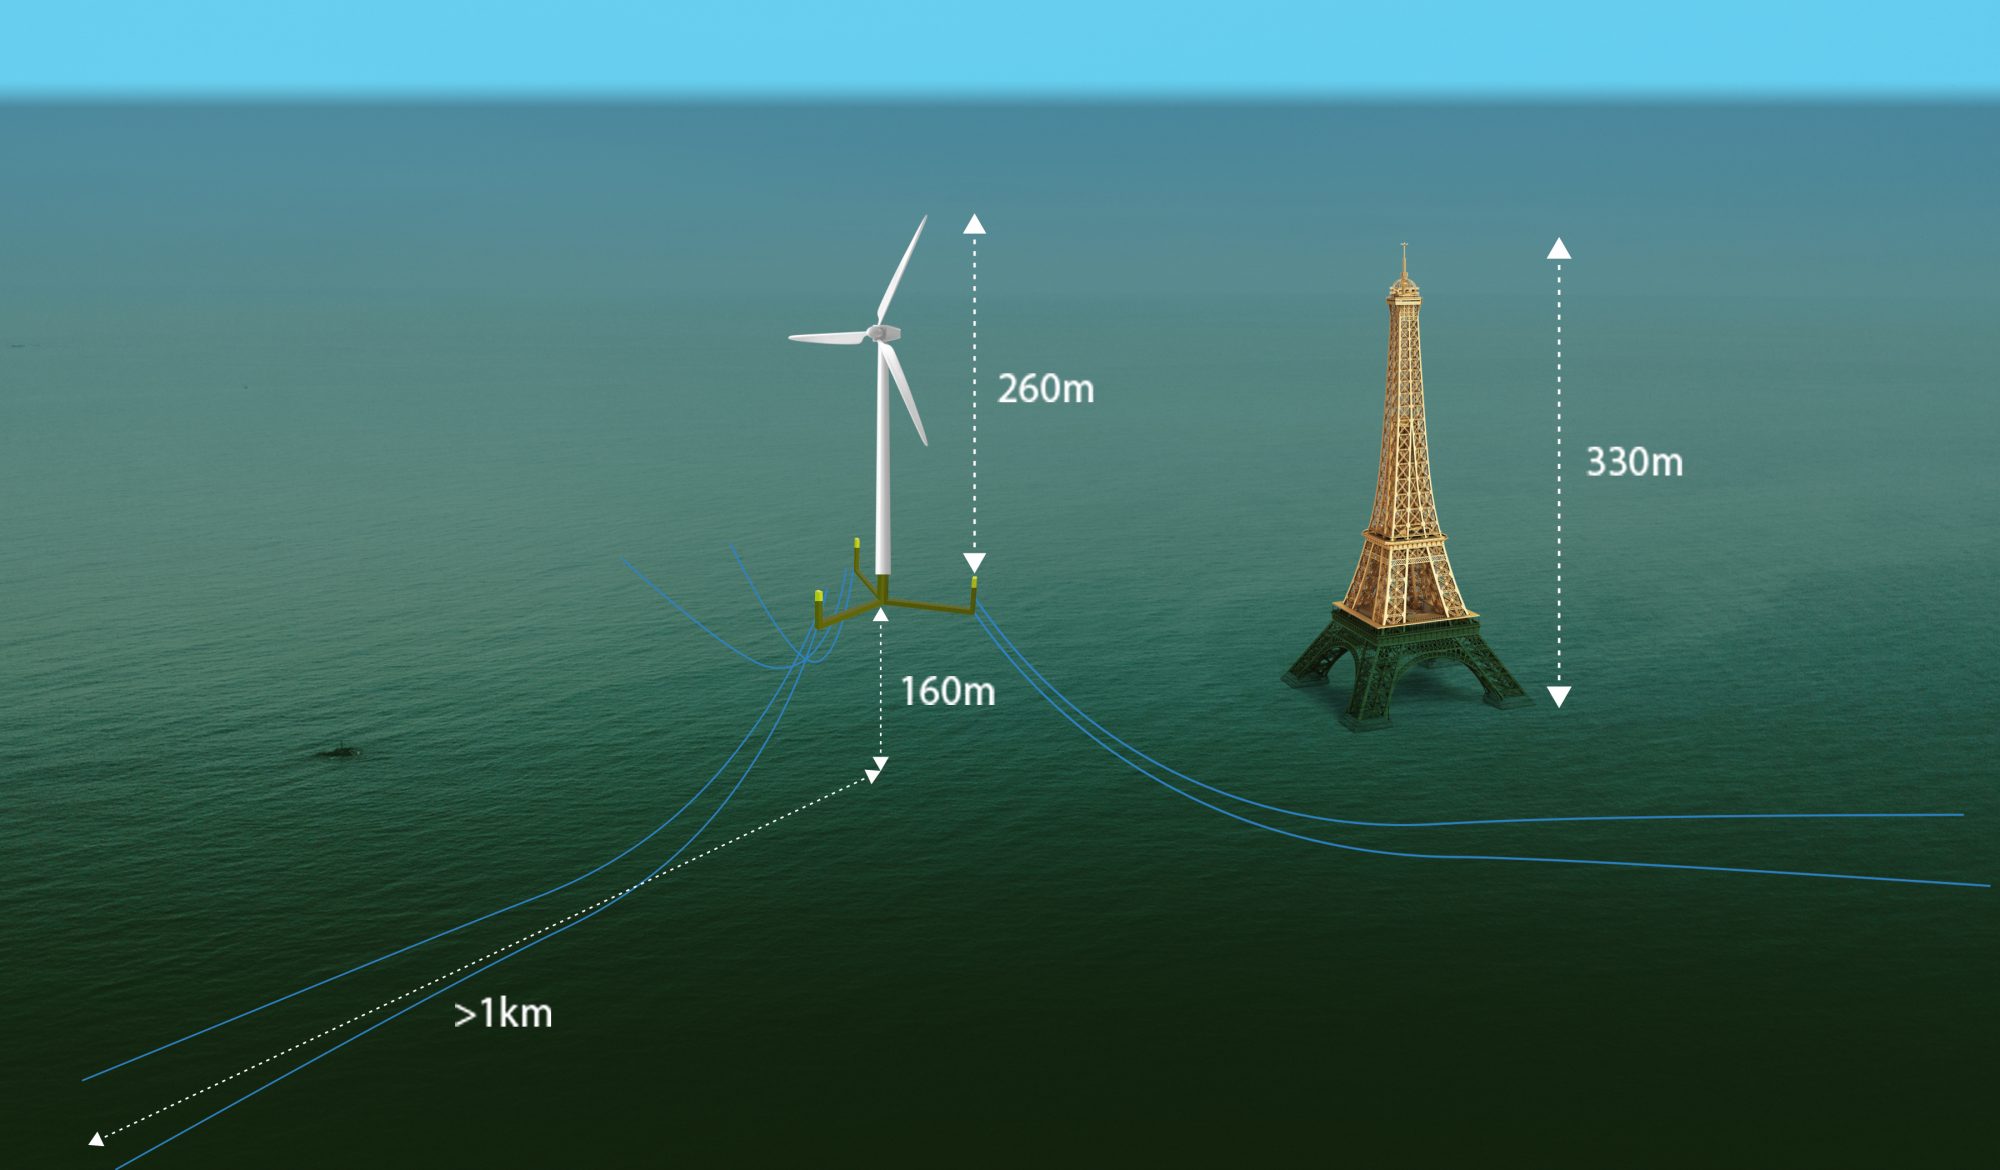 Size of FOWT platform and mooring compared to Eiffel Tower